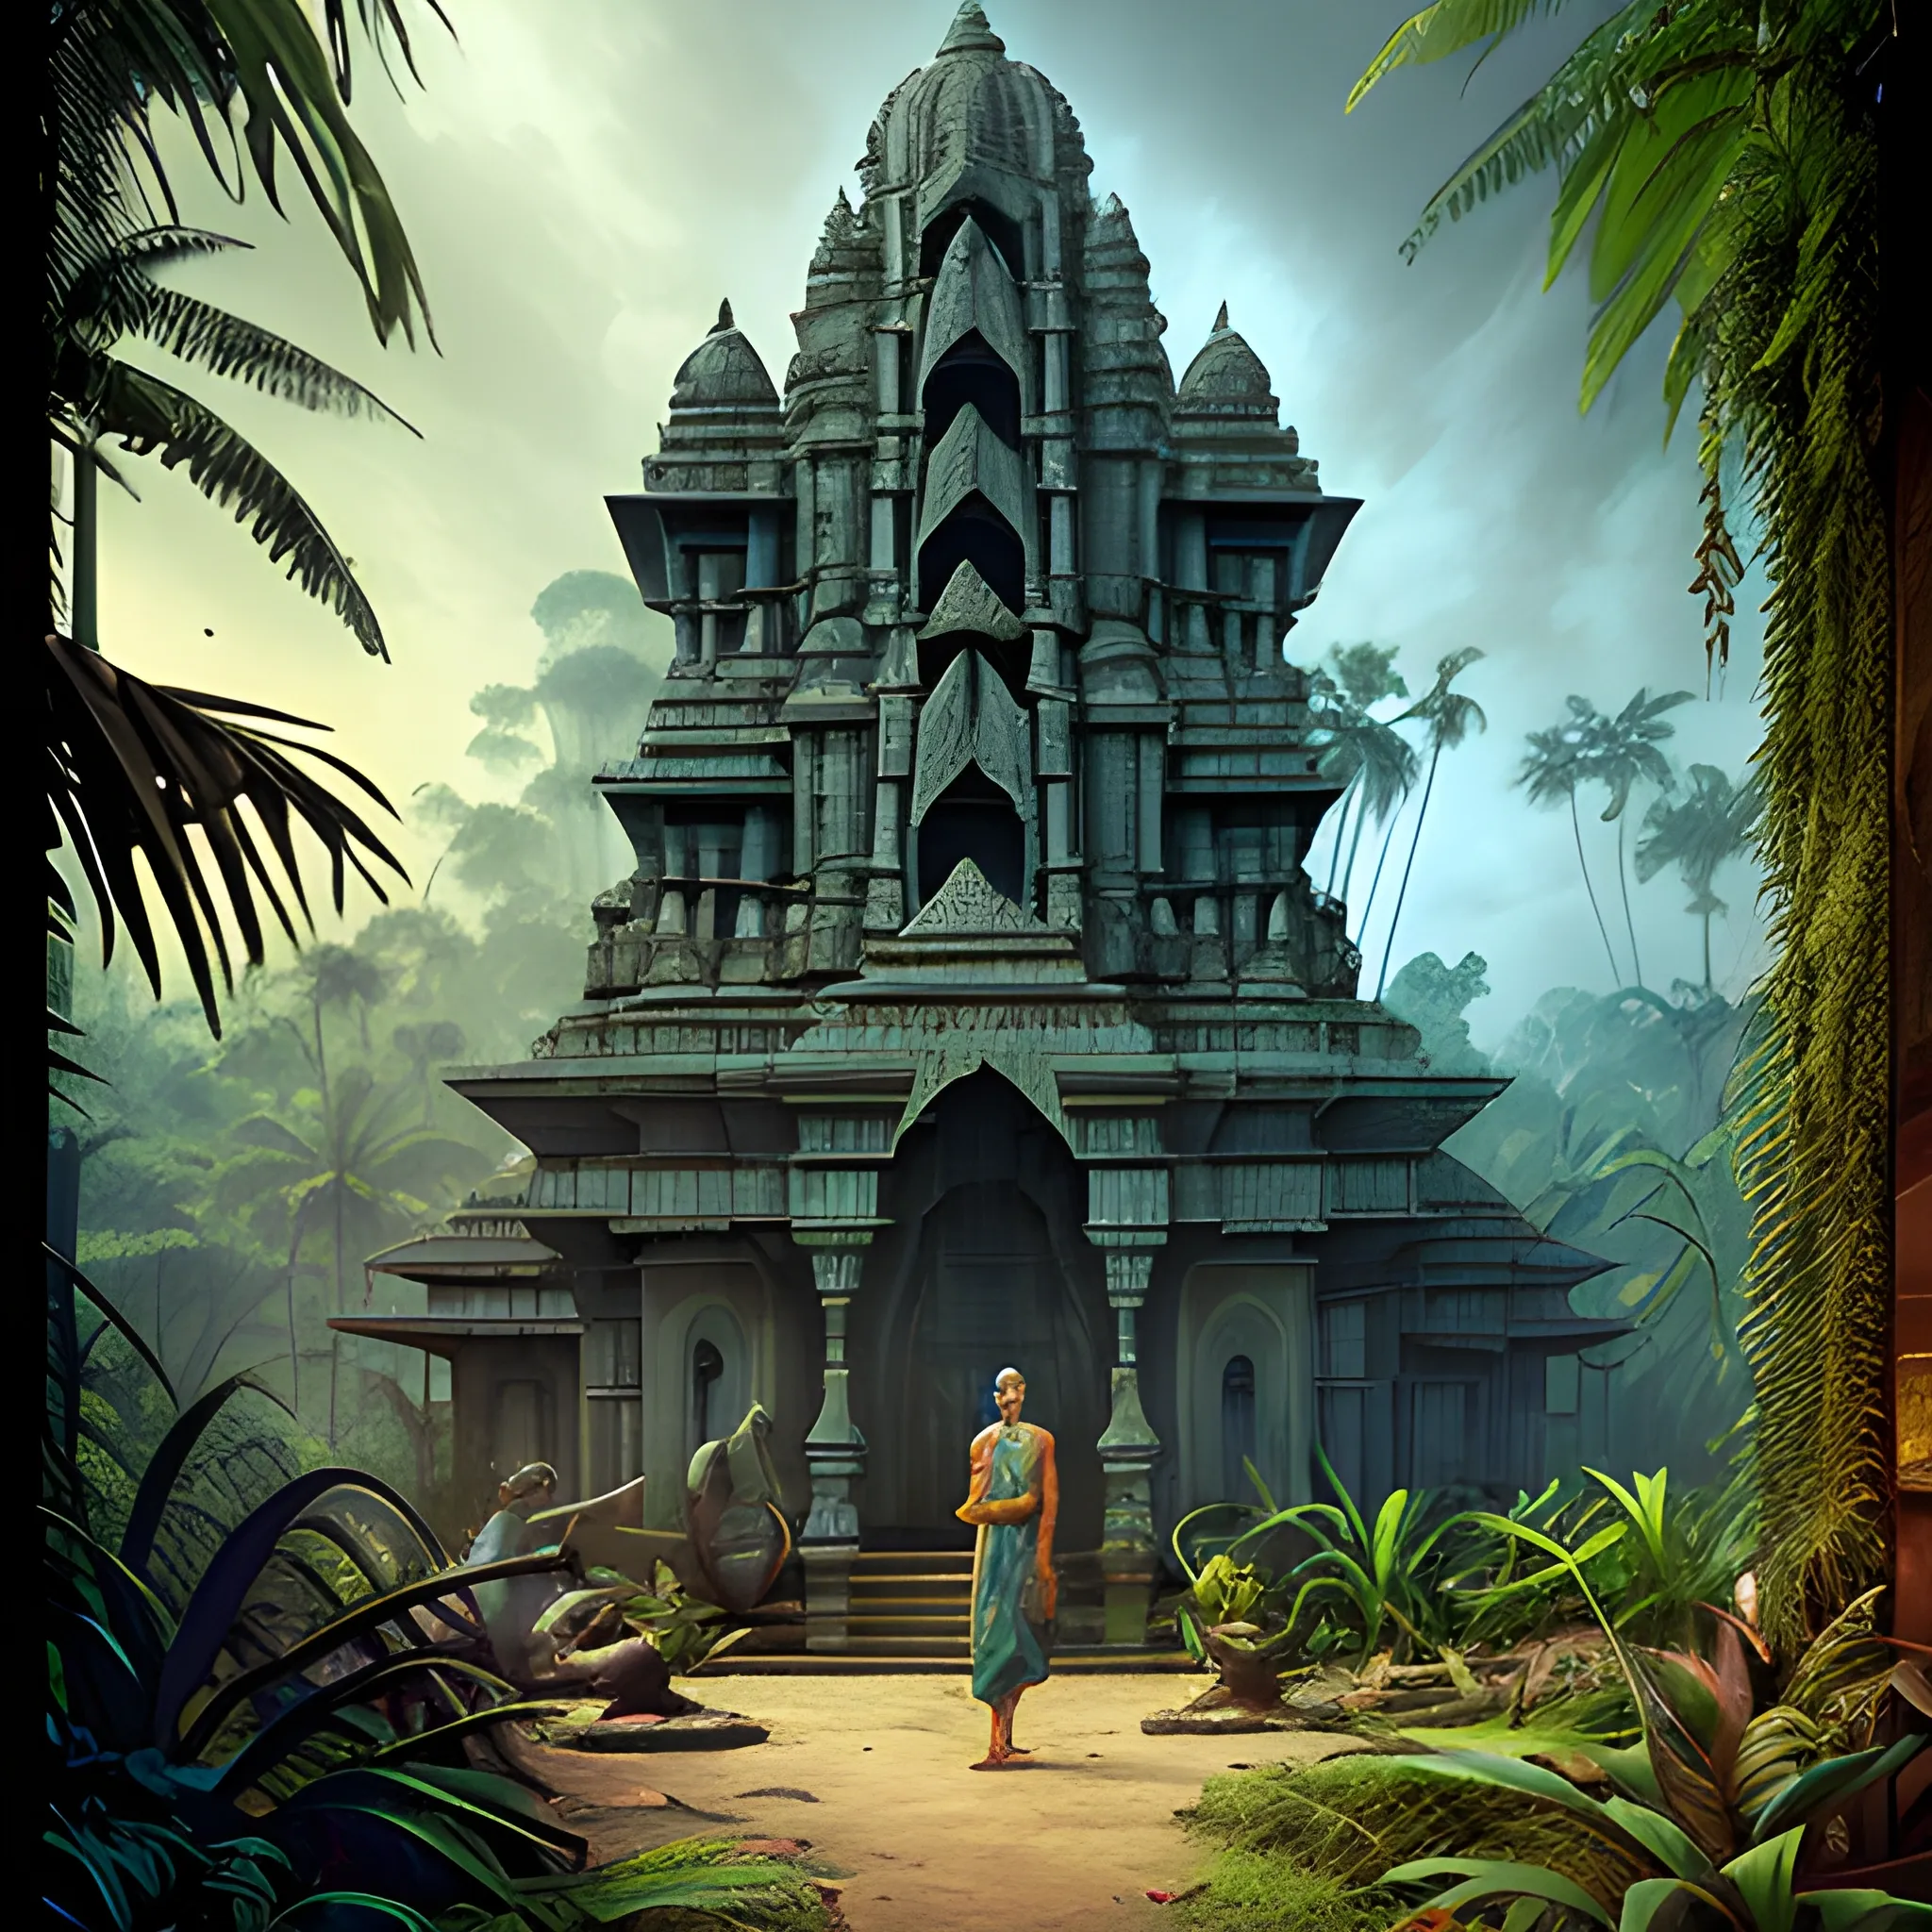 8 k concept art from a hindu temple lost in the jungle by david mattingly and samuel araya and michael whelan and dave mckean and richard corben. realistic matte painting with photorealistic hdr volumetric lighting. composition and layout inspired by Gregory Crewdson.